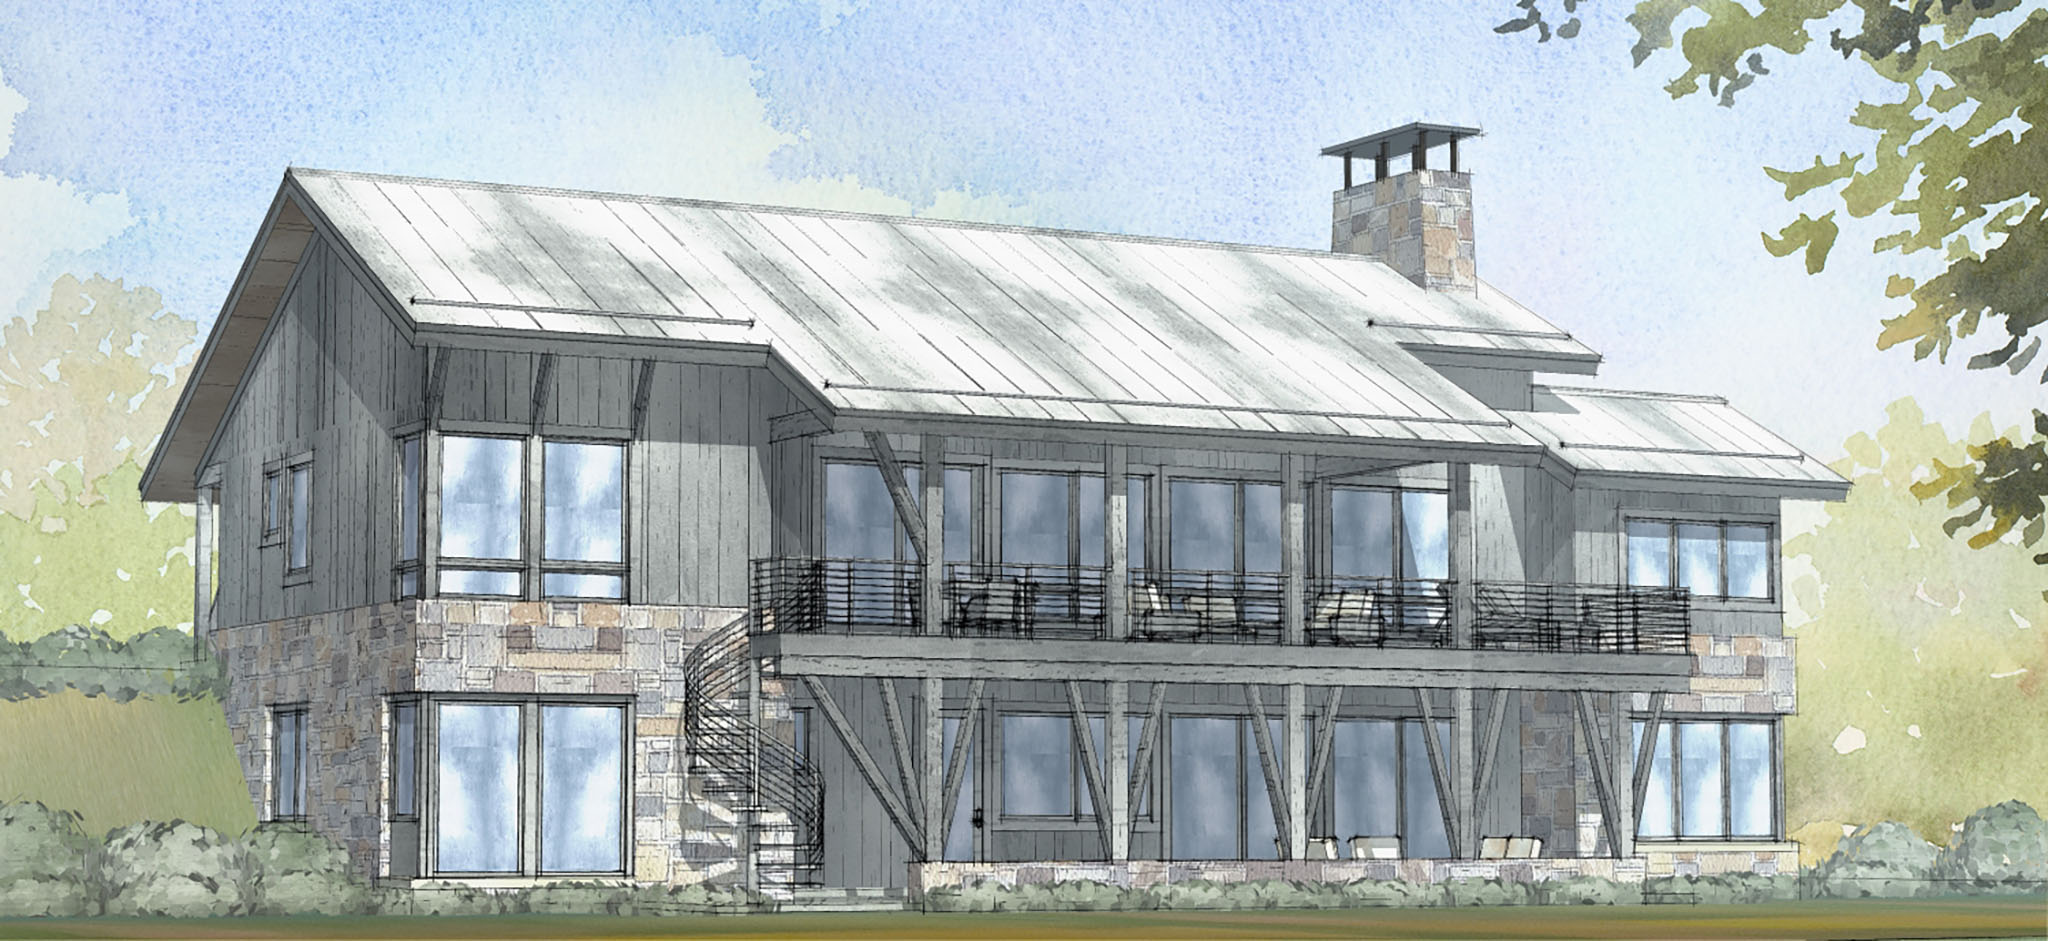 Mountain House Plans | Manitou Home Design | SketchPad House Plans